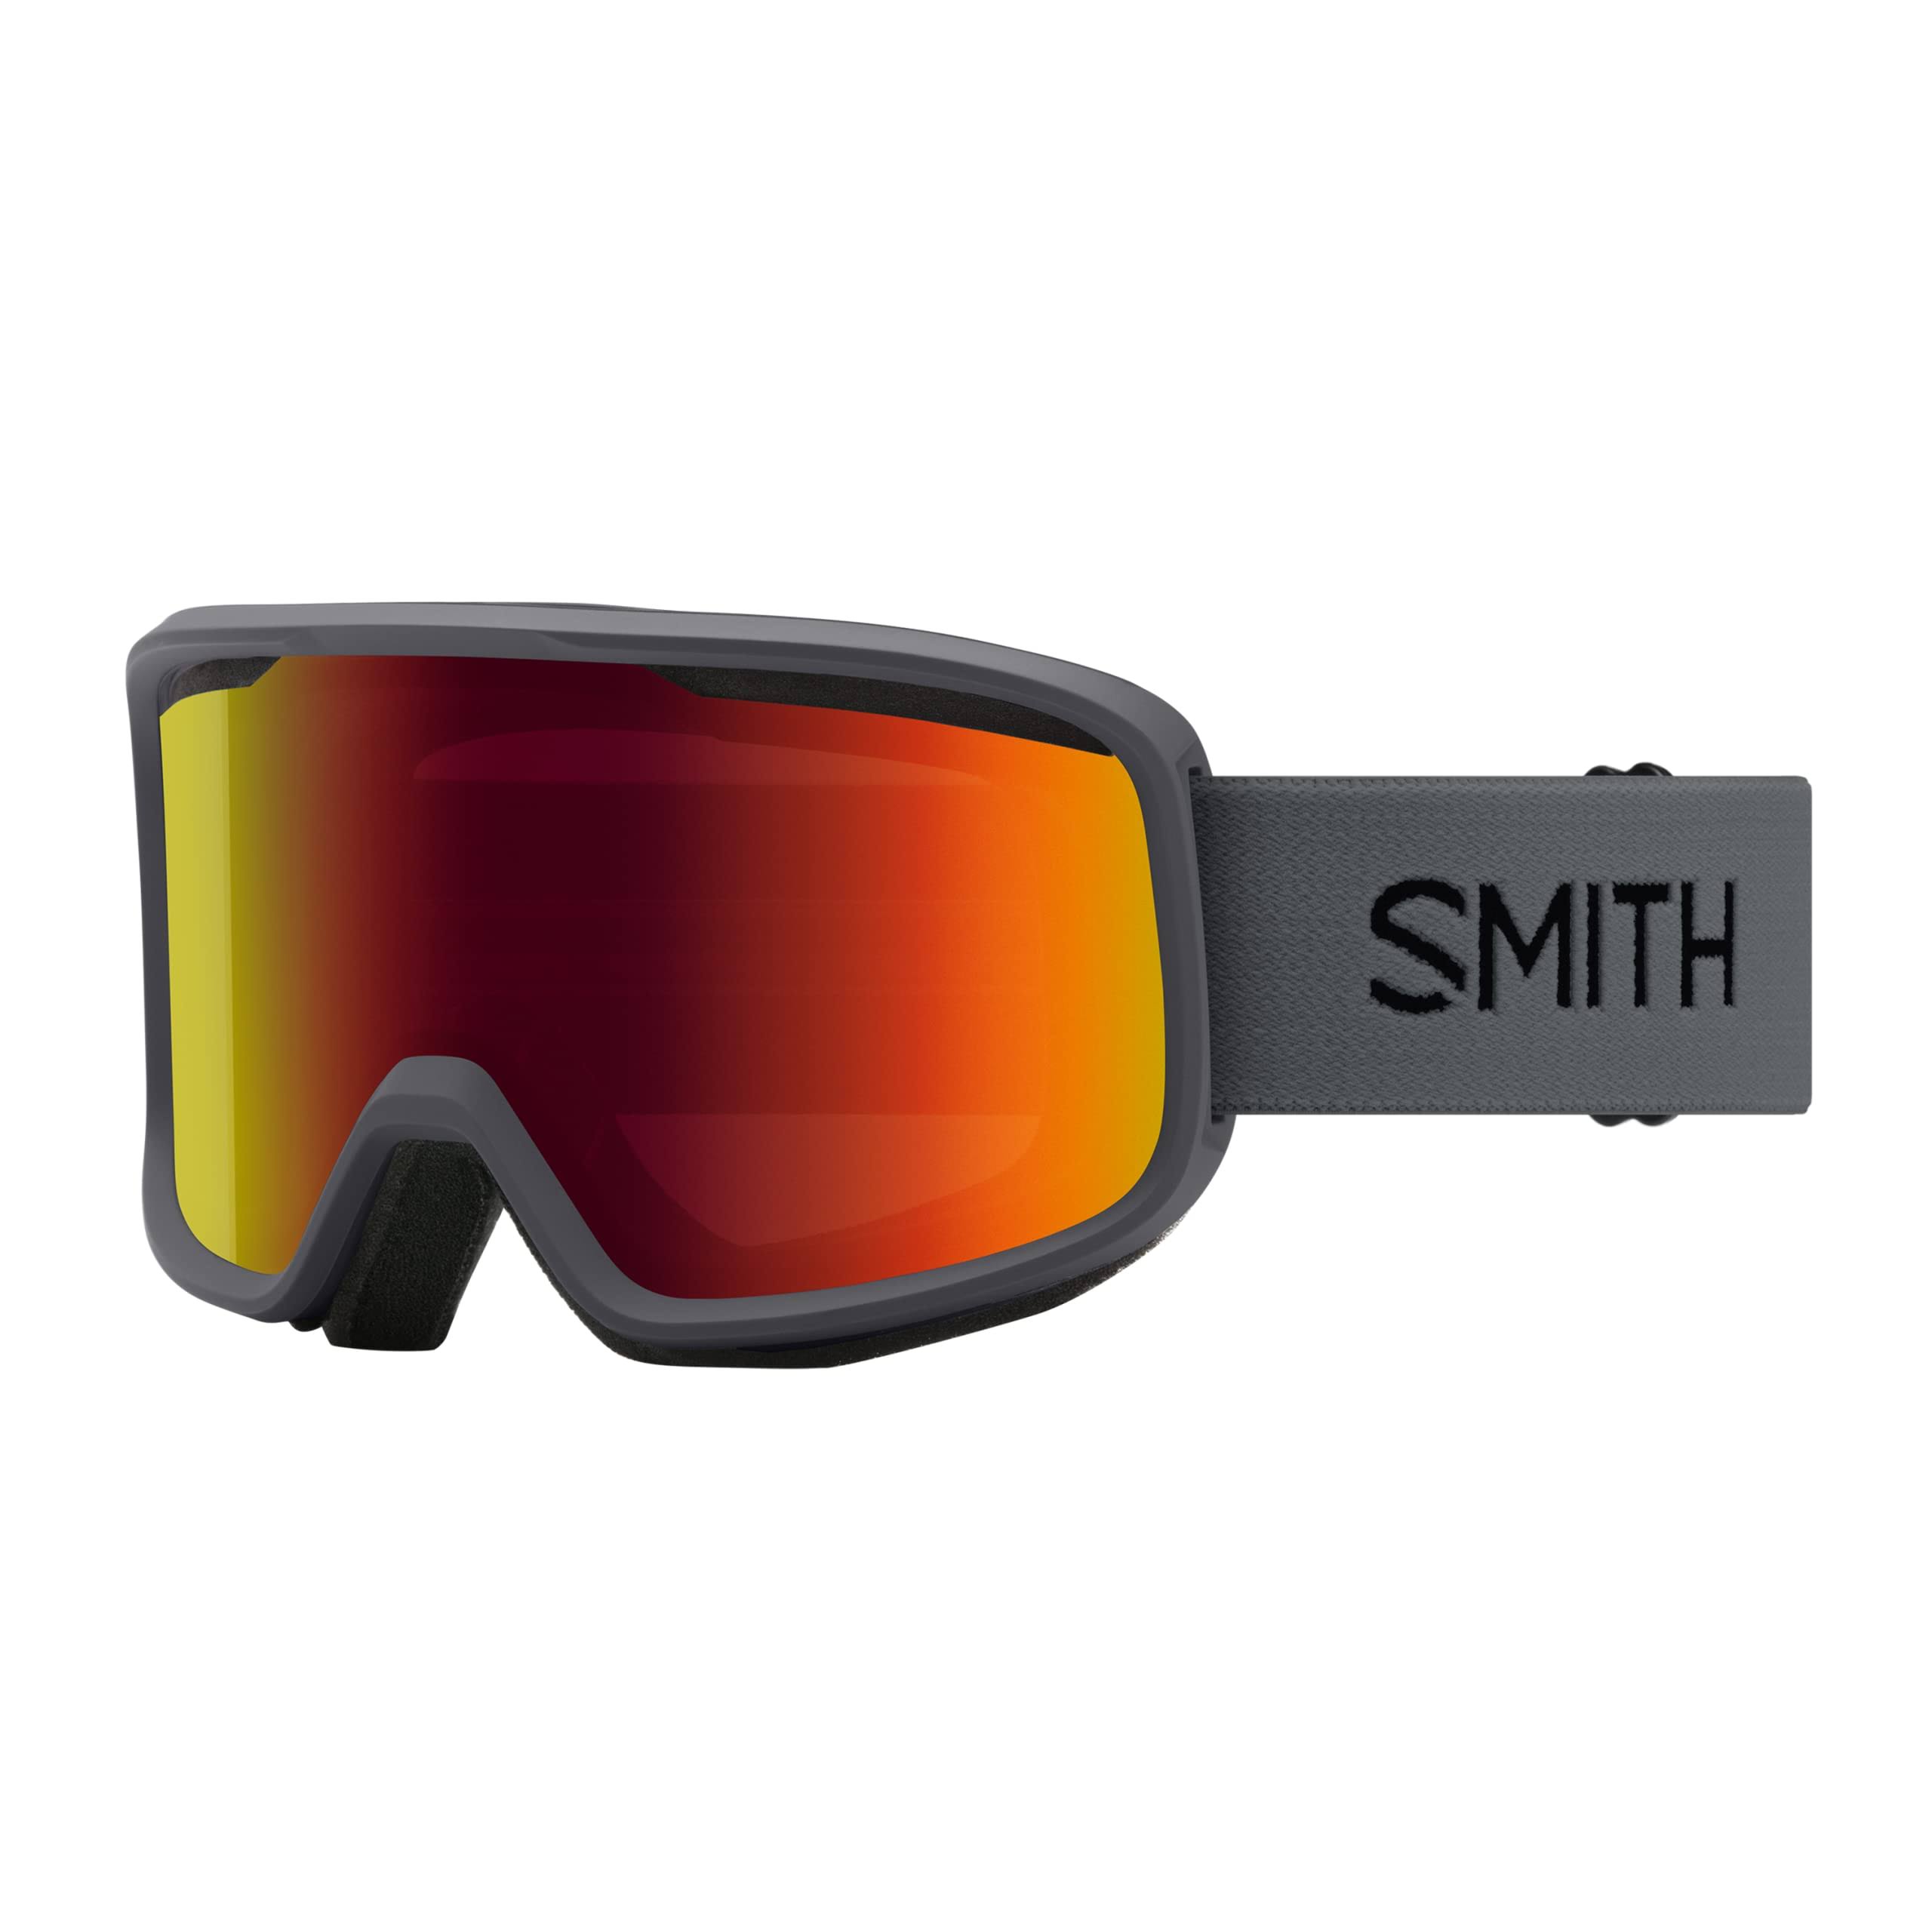 Smith Frontier Goggles Charcoal Red Sol-X Mirror M004292QQ99C1